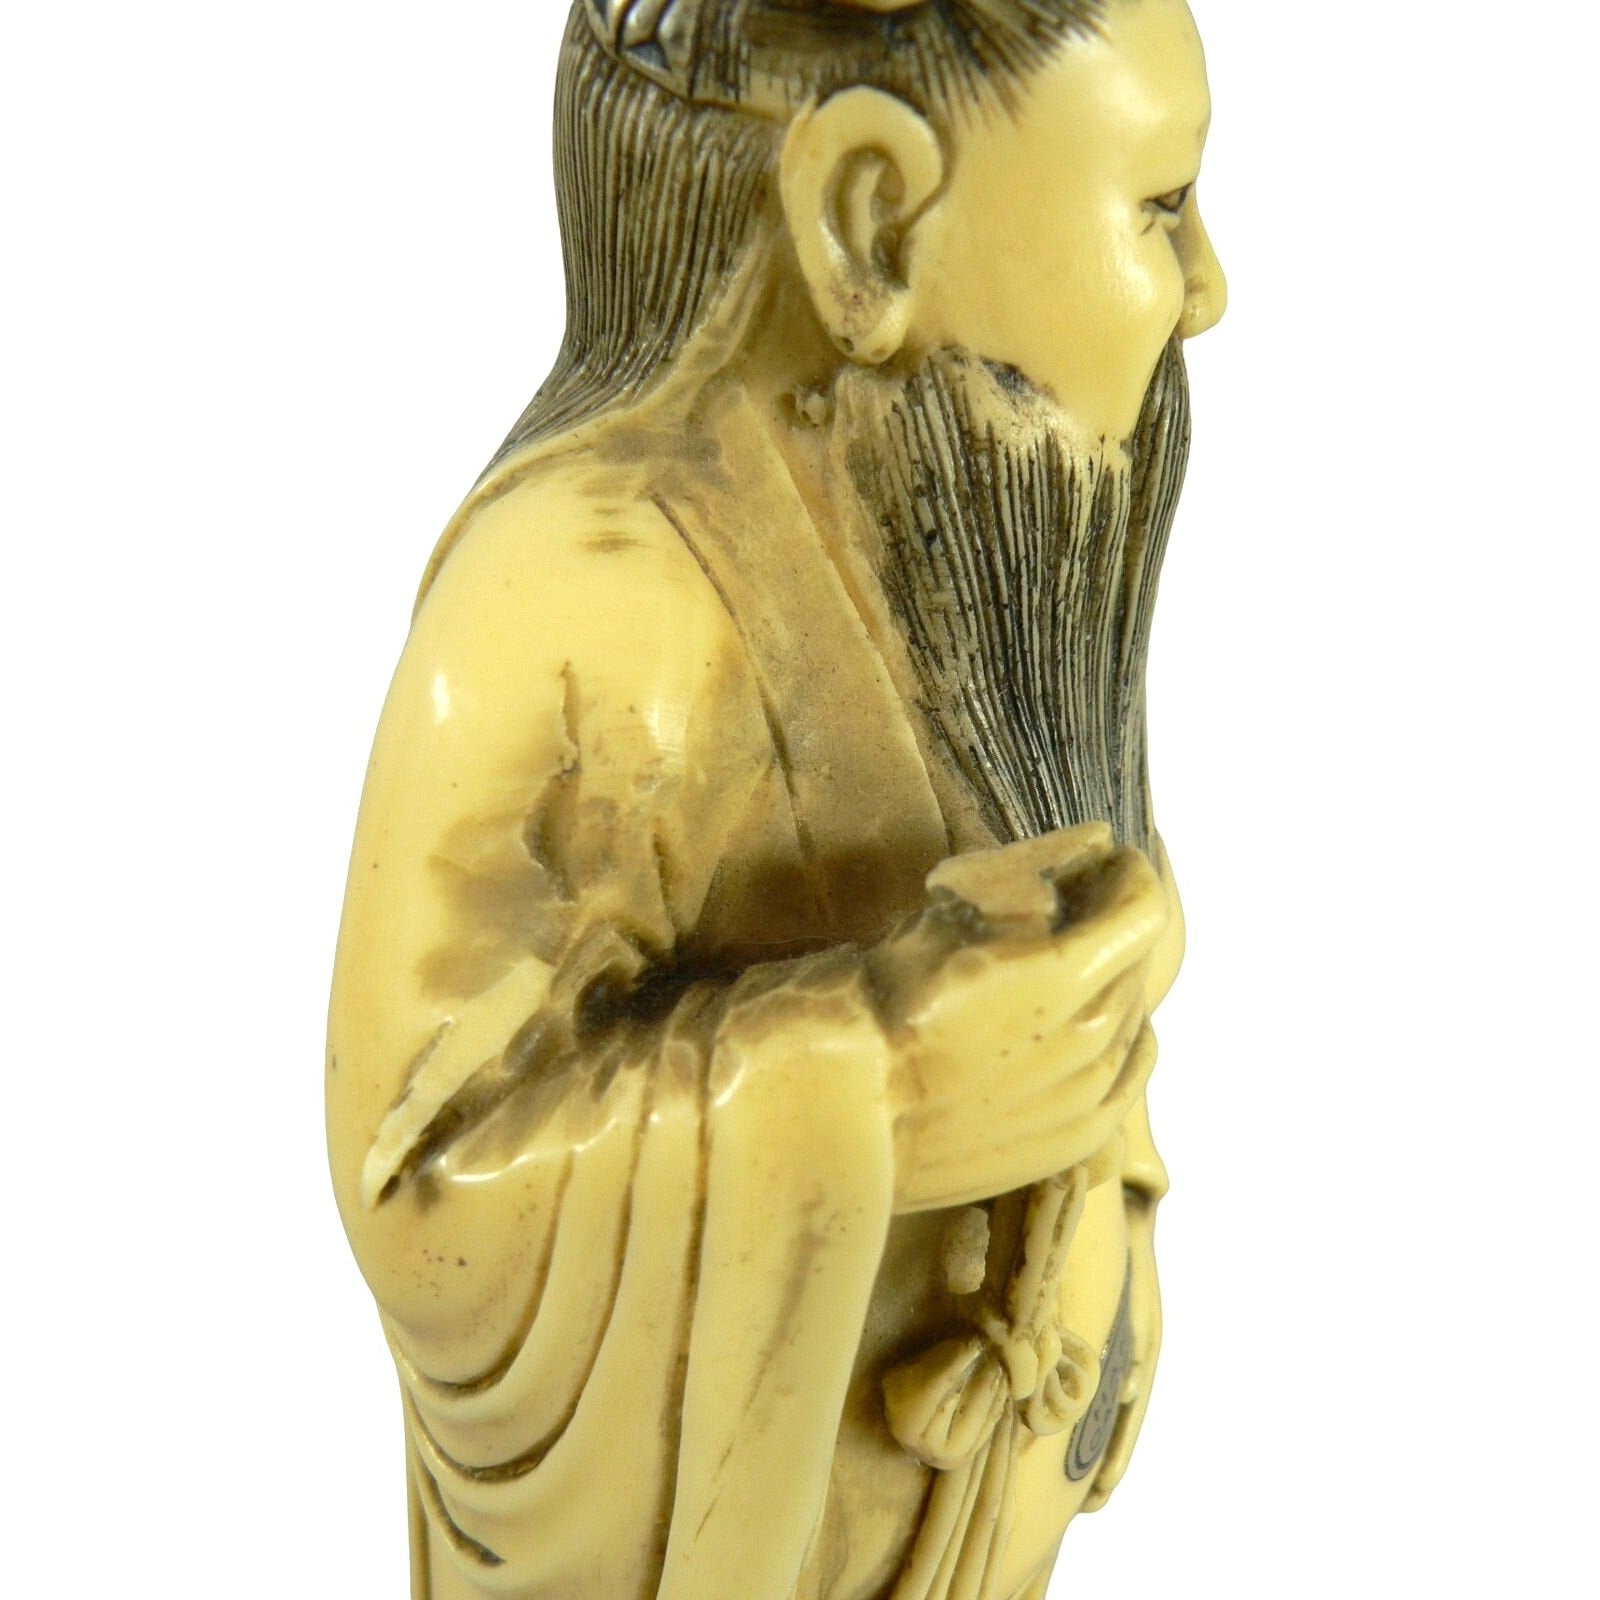 Figurine Chinese Male Robed Bearded Hand Carved Chop Marked Asian Markings 8.5"